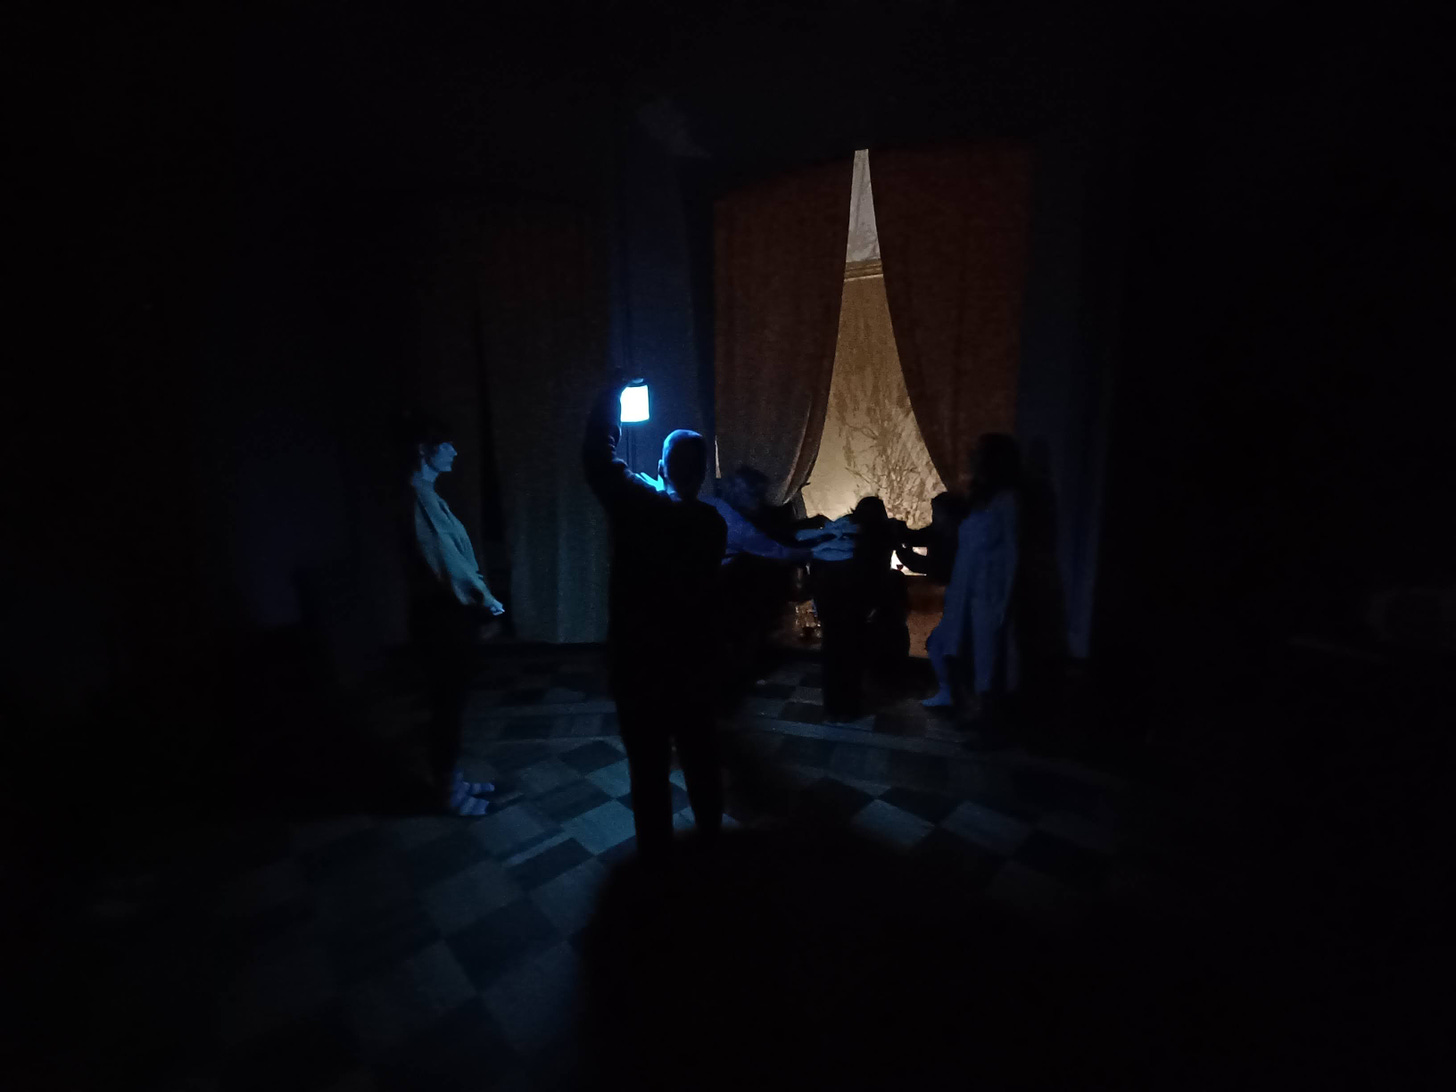 Most of the image is dark, but a figure holds up a lantern giving off blue light. Through a parted curtain you can make out a golden light with the shadows of branches and several figures clustered together as they bow.